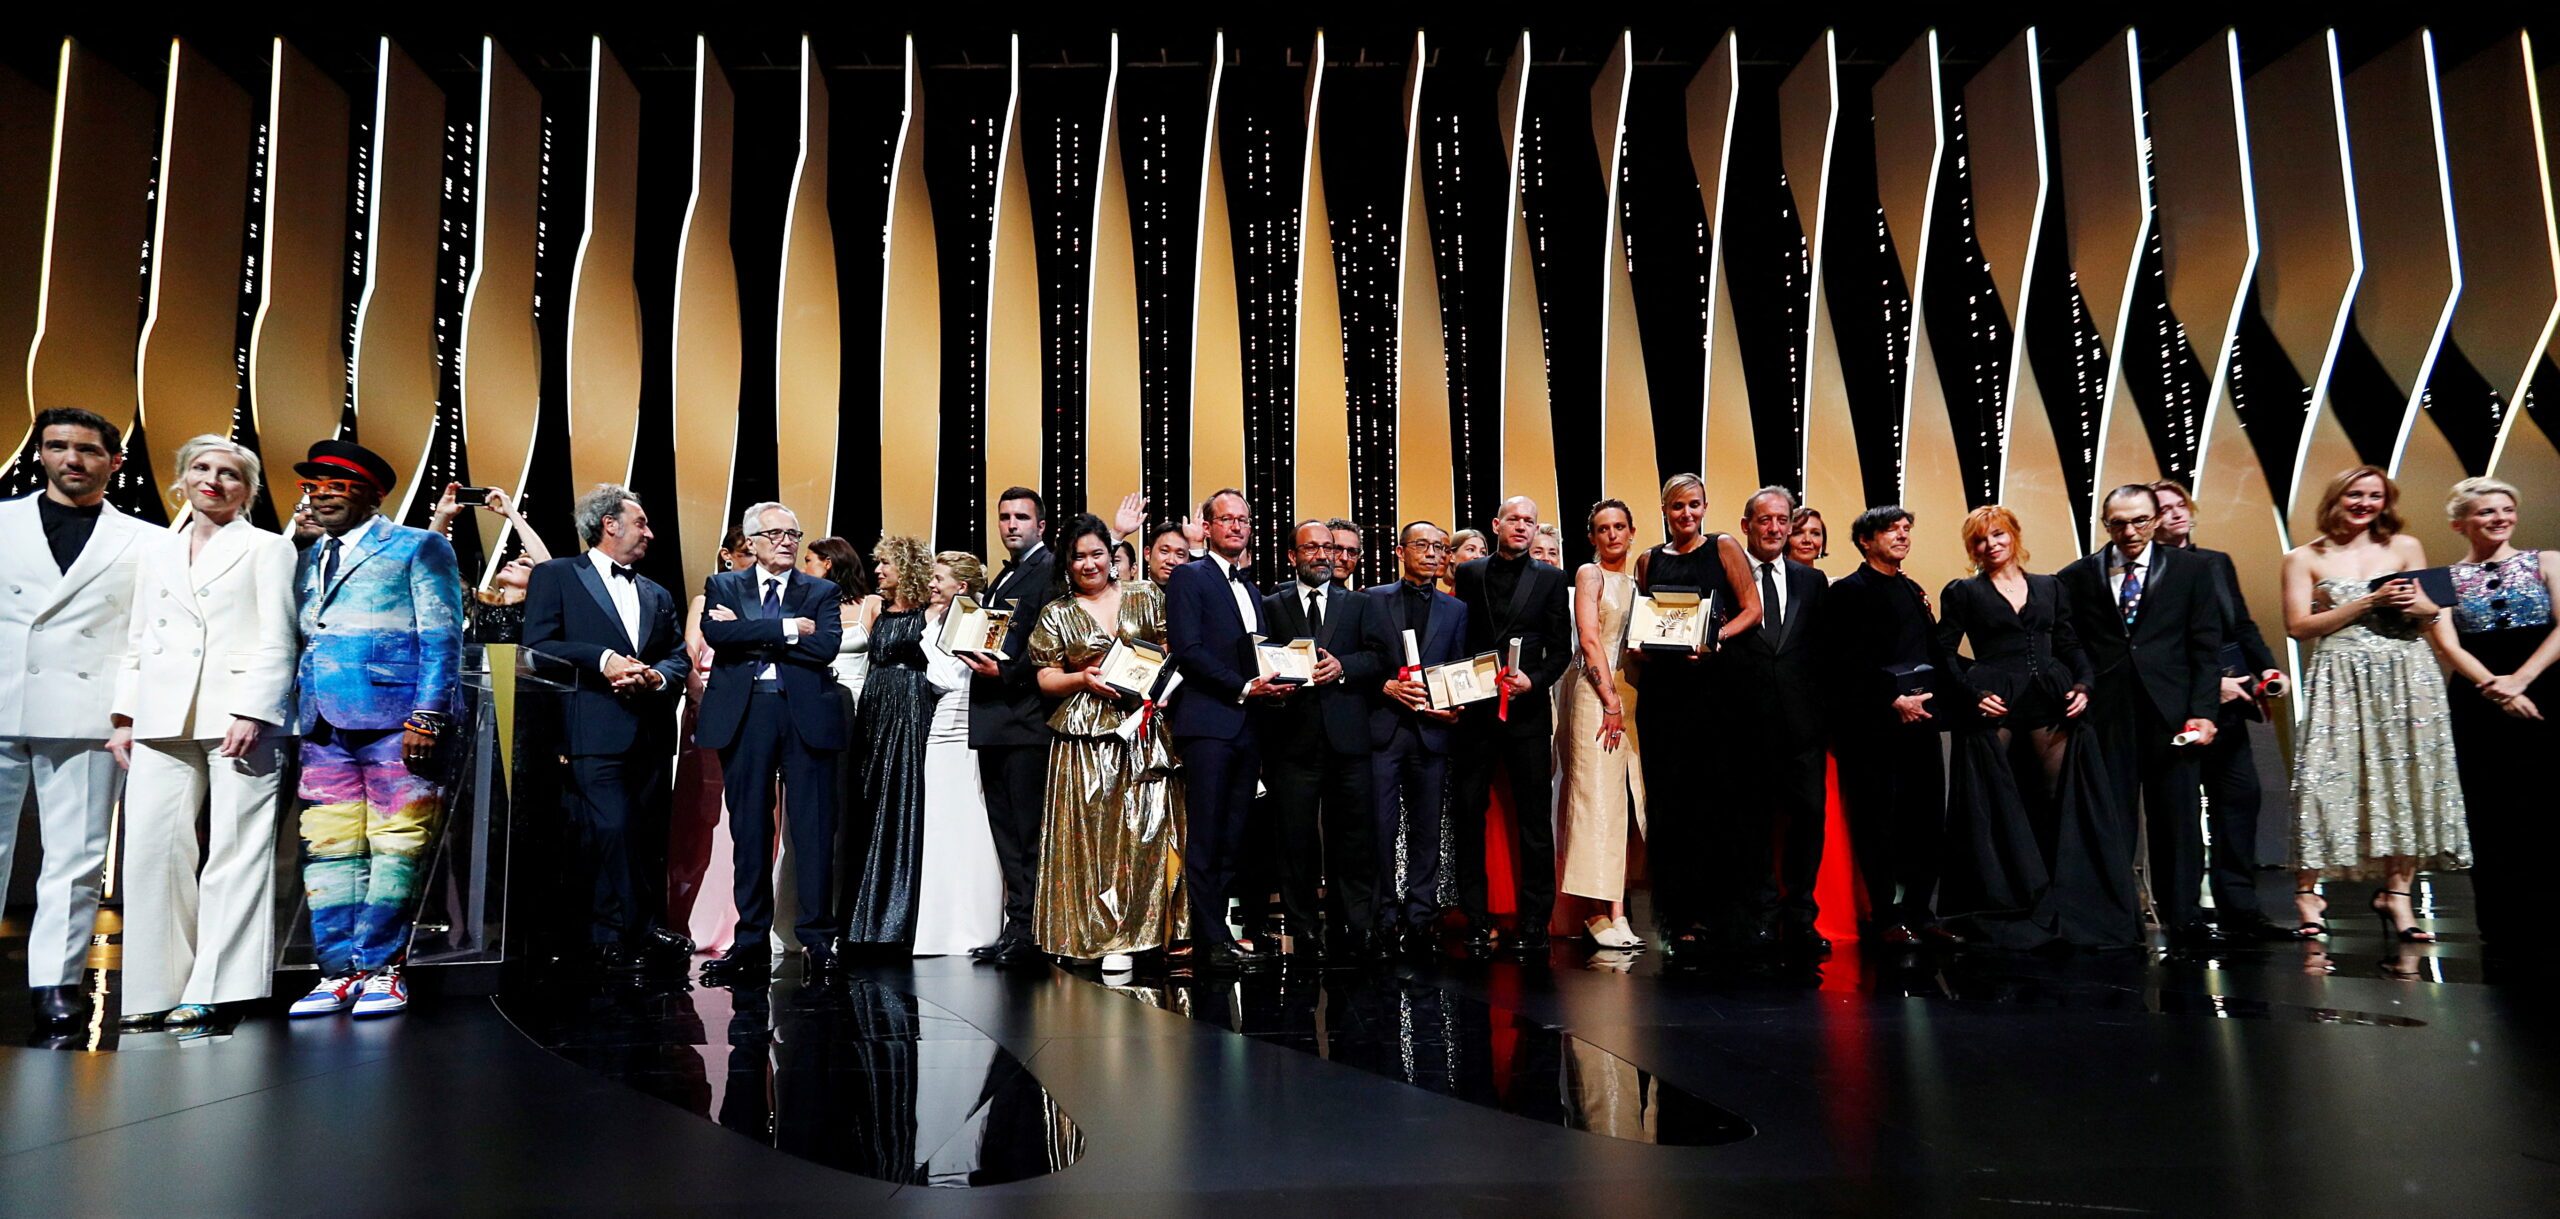 Cannes film festival bans Russia from 2022 event